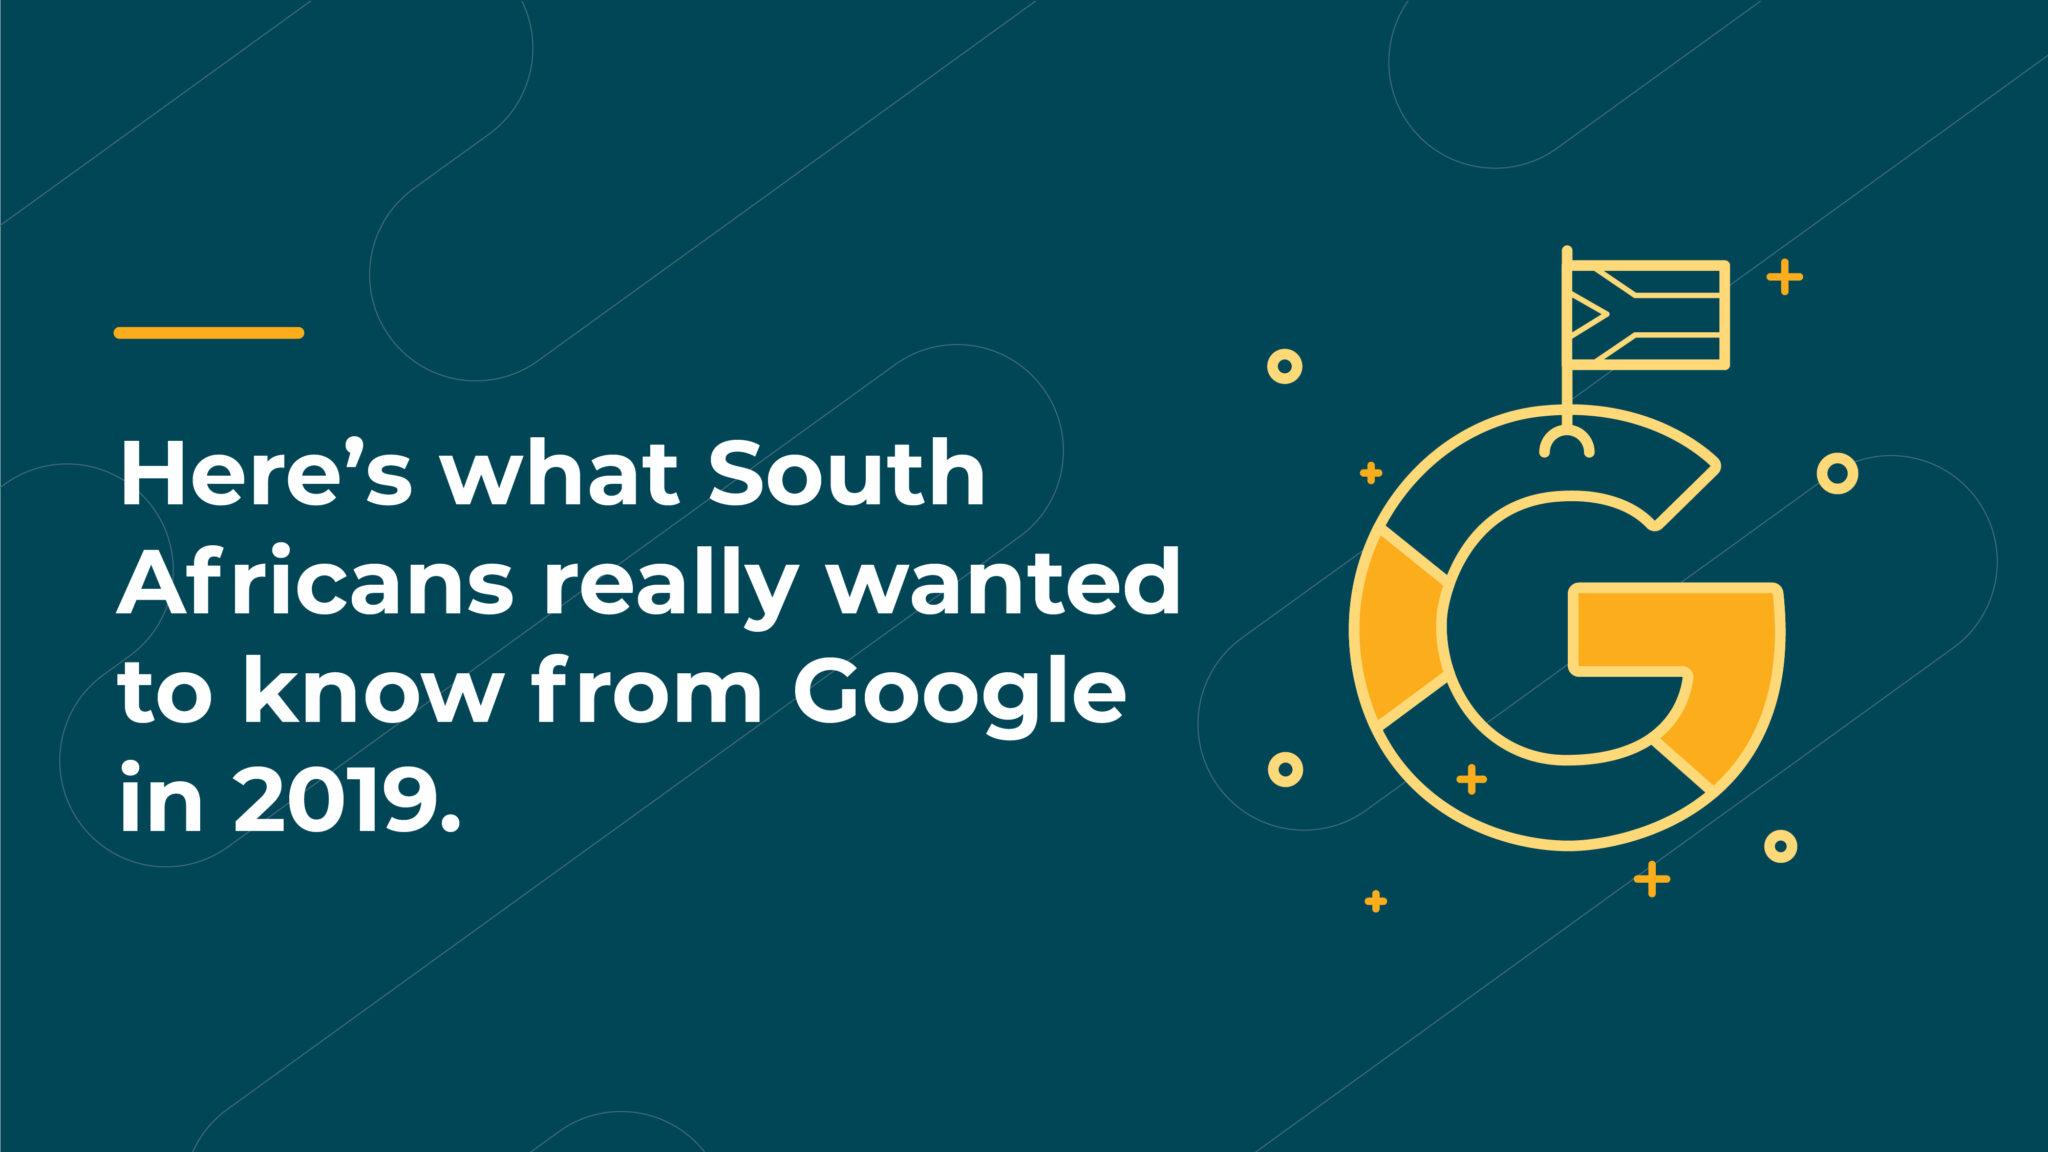 Here’s what South Africans really wanted to know from Google in 2019